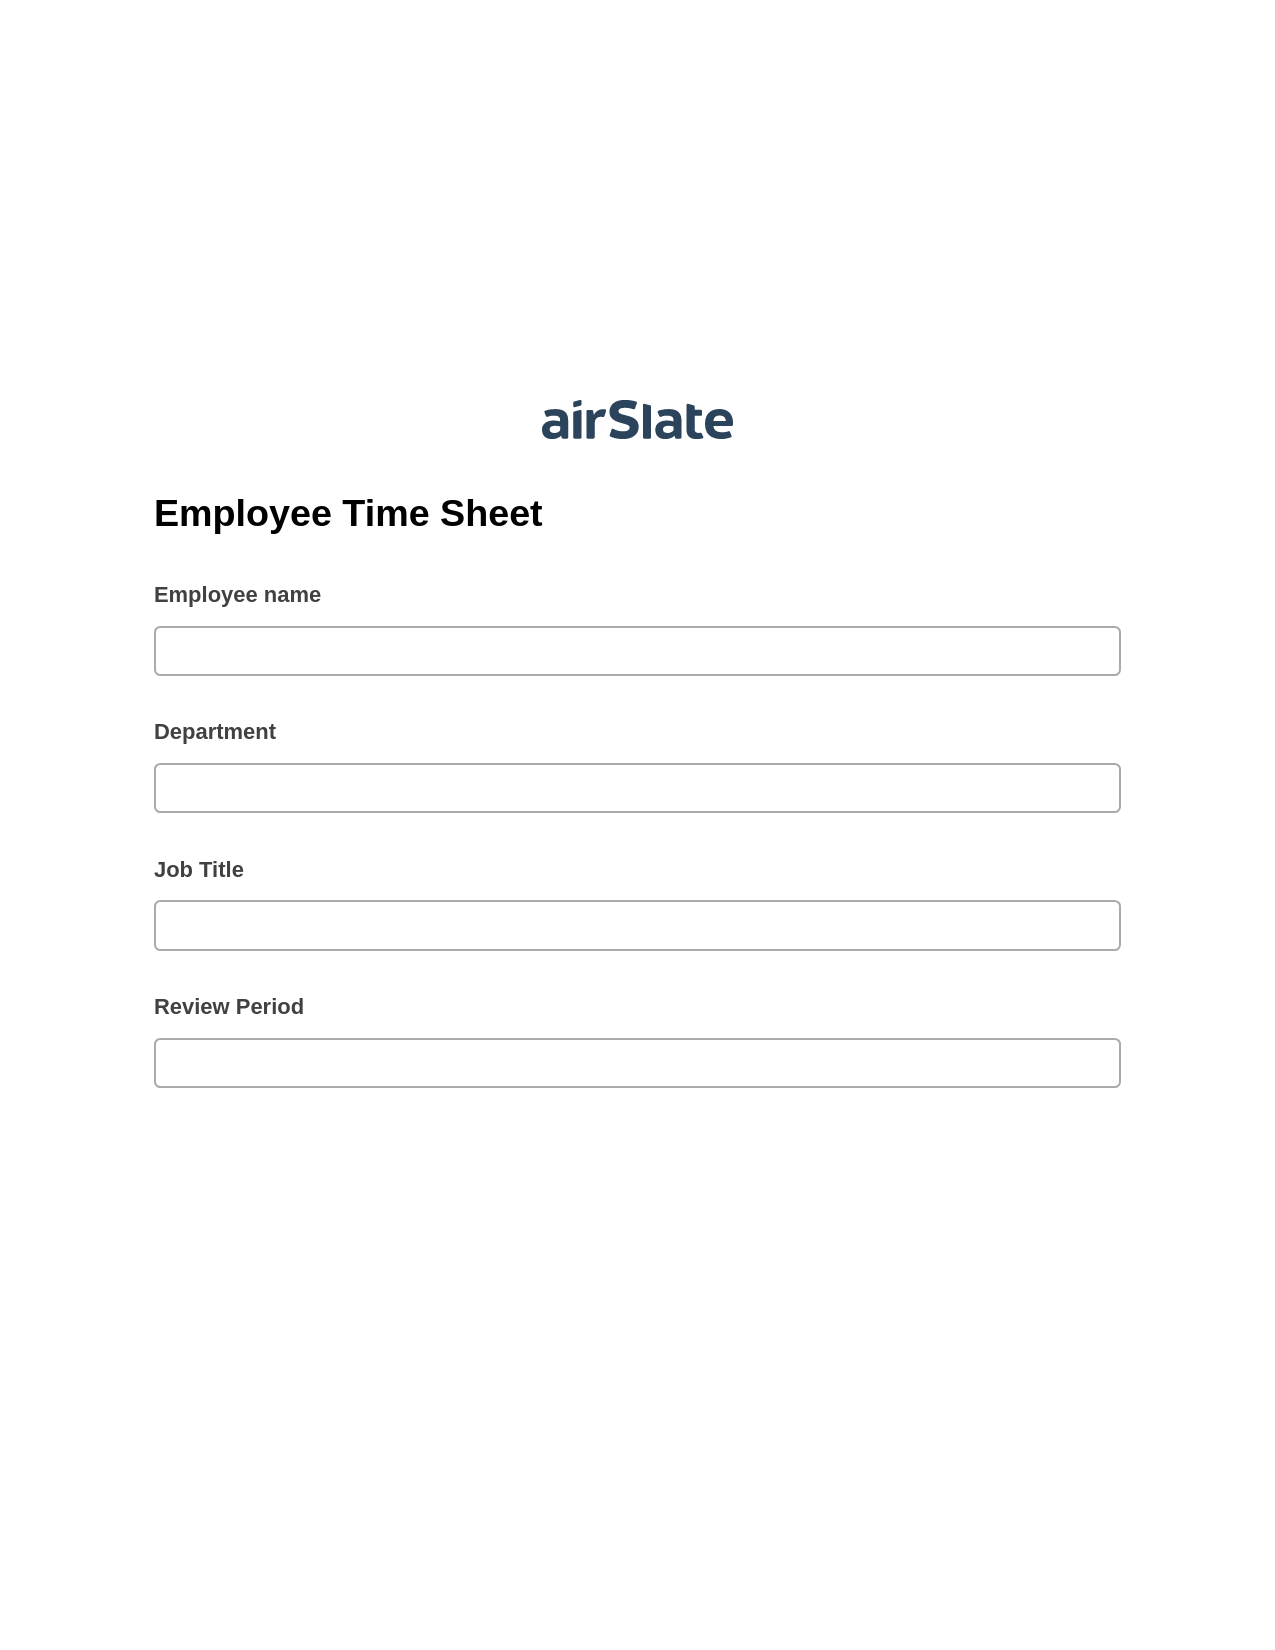 Employee Time Sheet Pre-fill from Litmos bot, Lock the Slate Bot, Archive to SharePoint Folder Bot